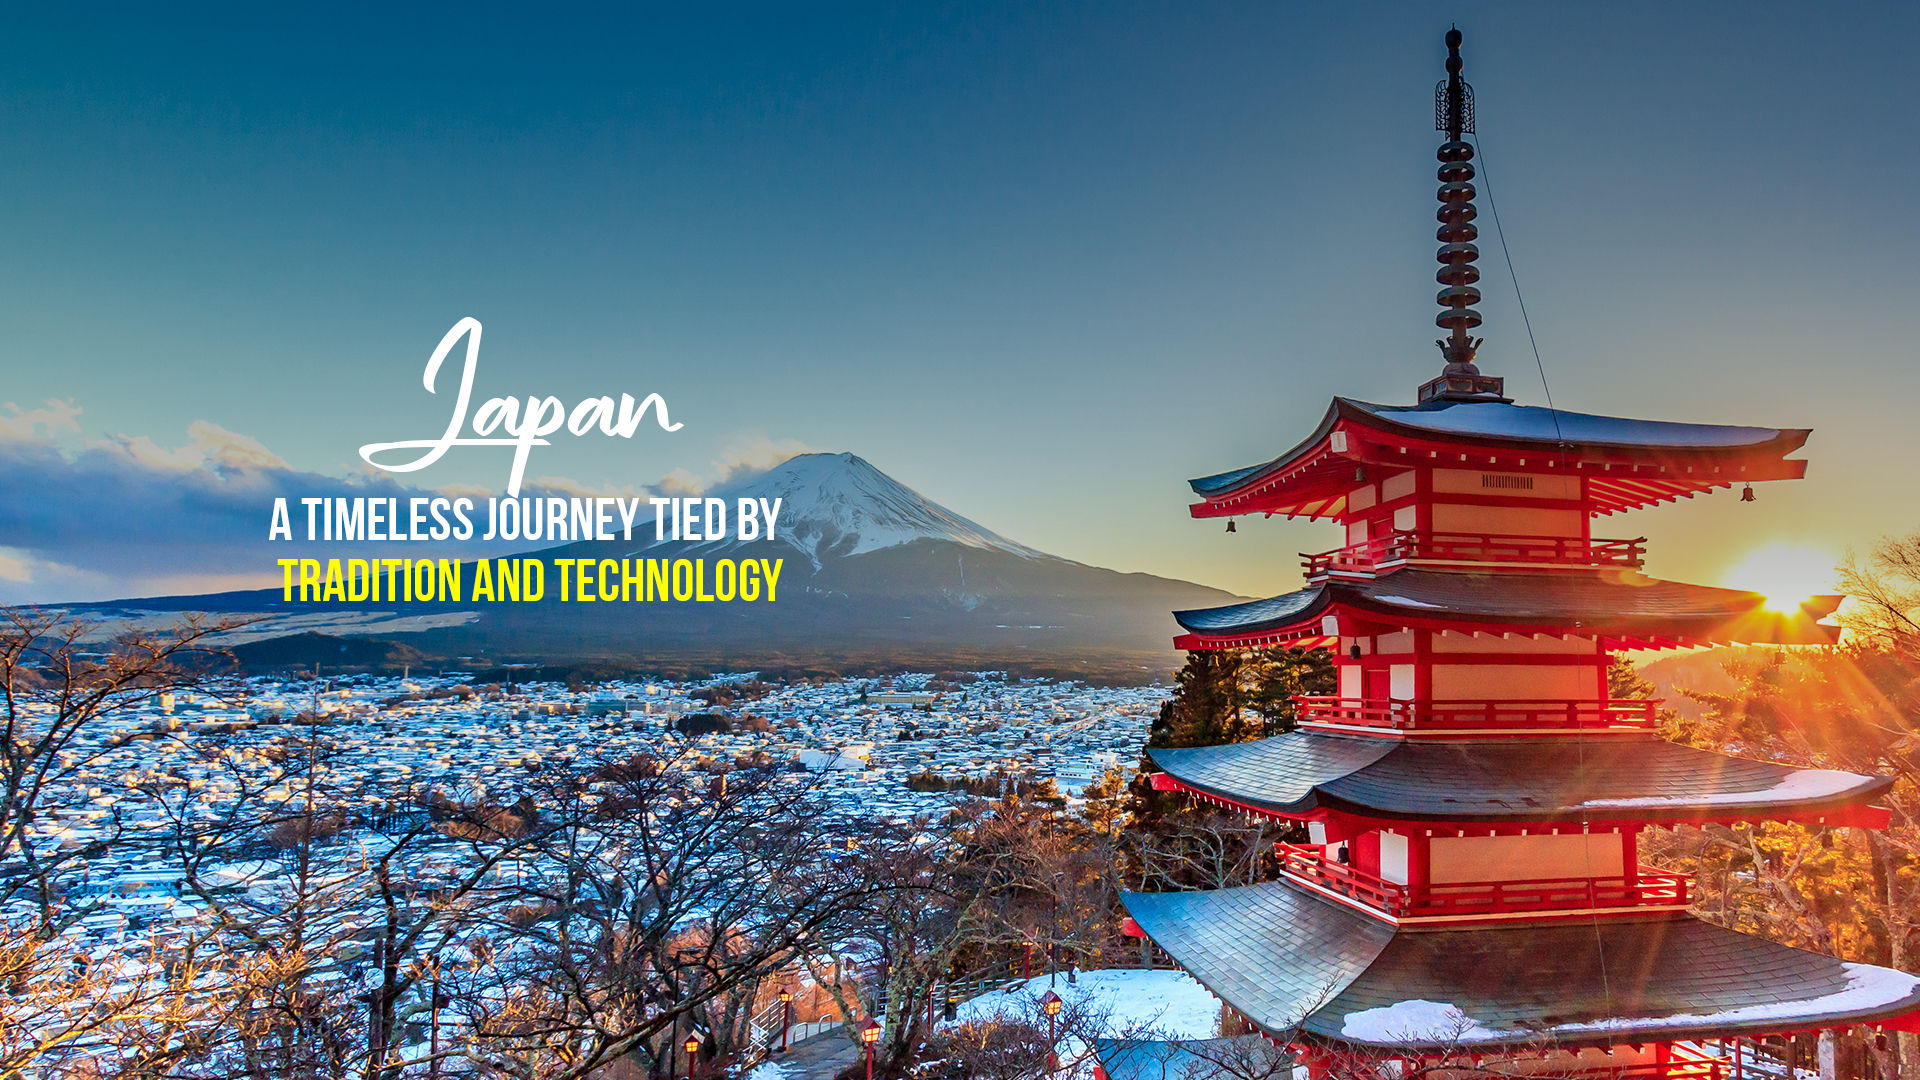 Japan Tour packages Book Japan Tours and Holiday Packages Tripoto